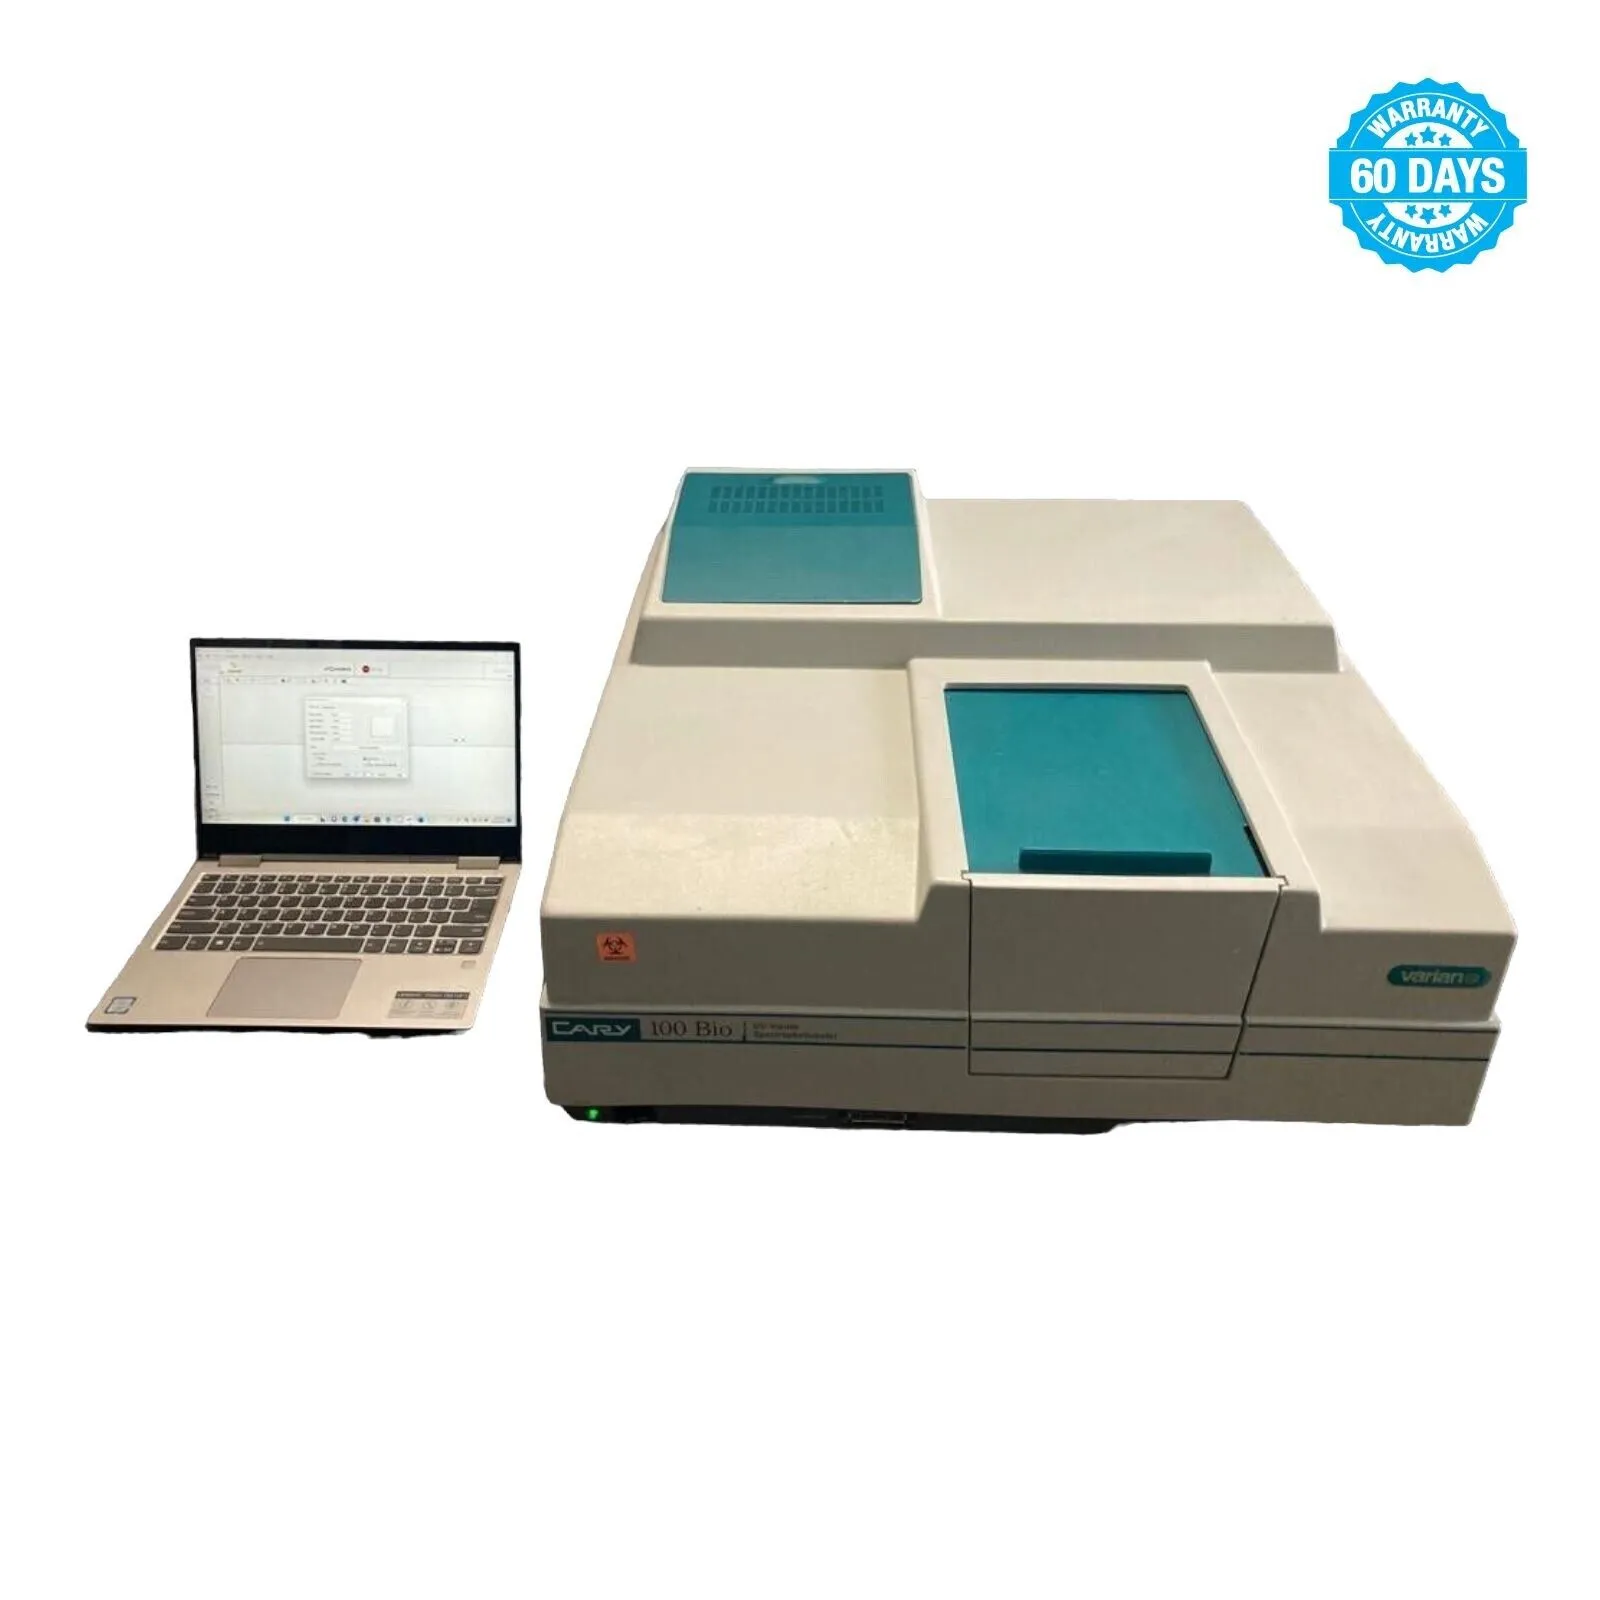 Varian Cary 100 Bio UV Visible Spectrophotometer + LAPTOP + WinUV SOFTWARE 3.0